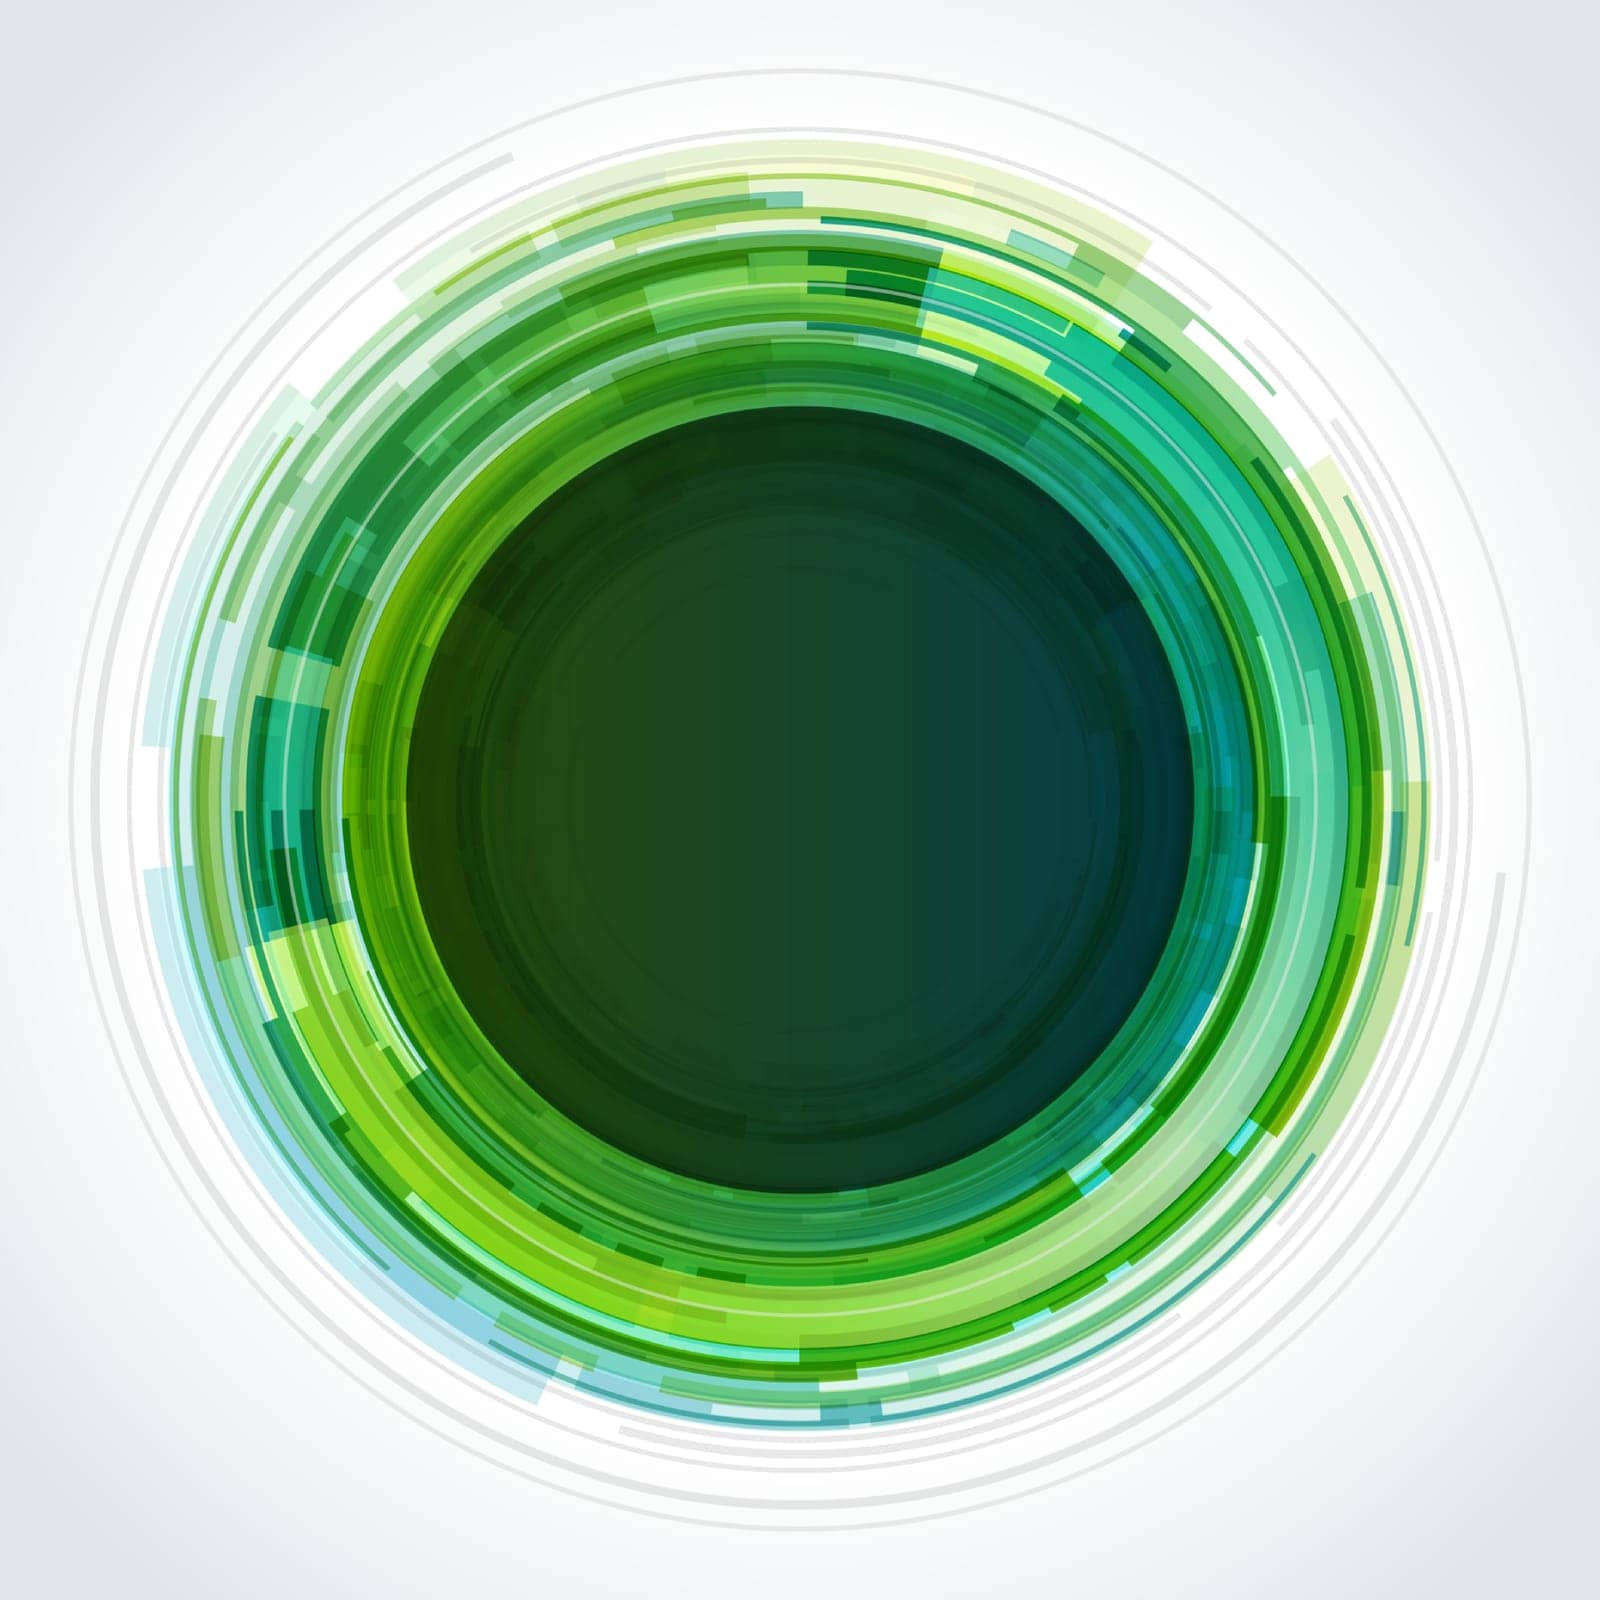 A brightly colored circle contrasts against a white background in this abstract composition, creating a visually striking image.